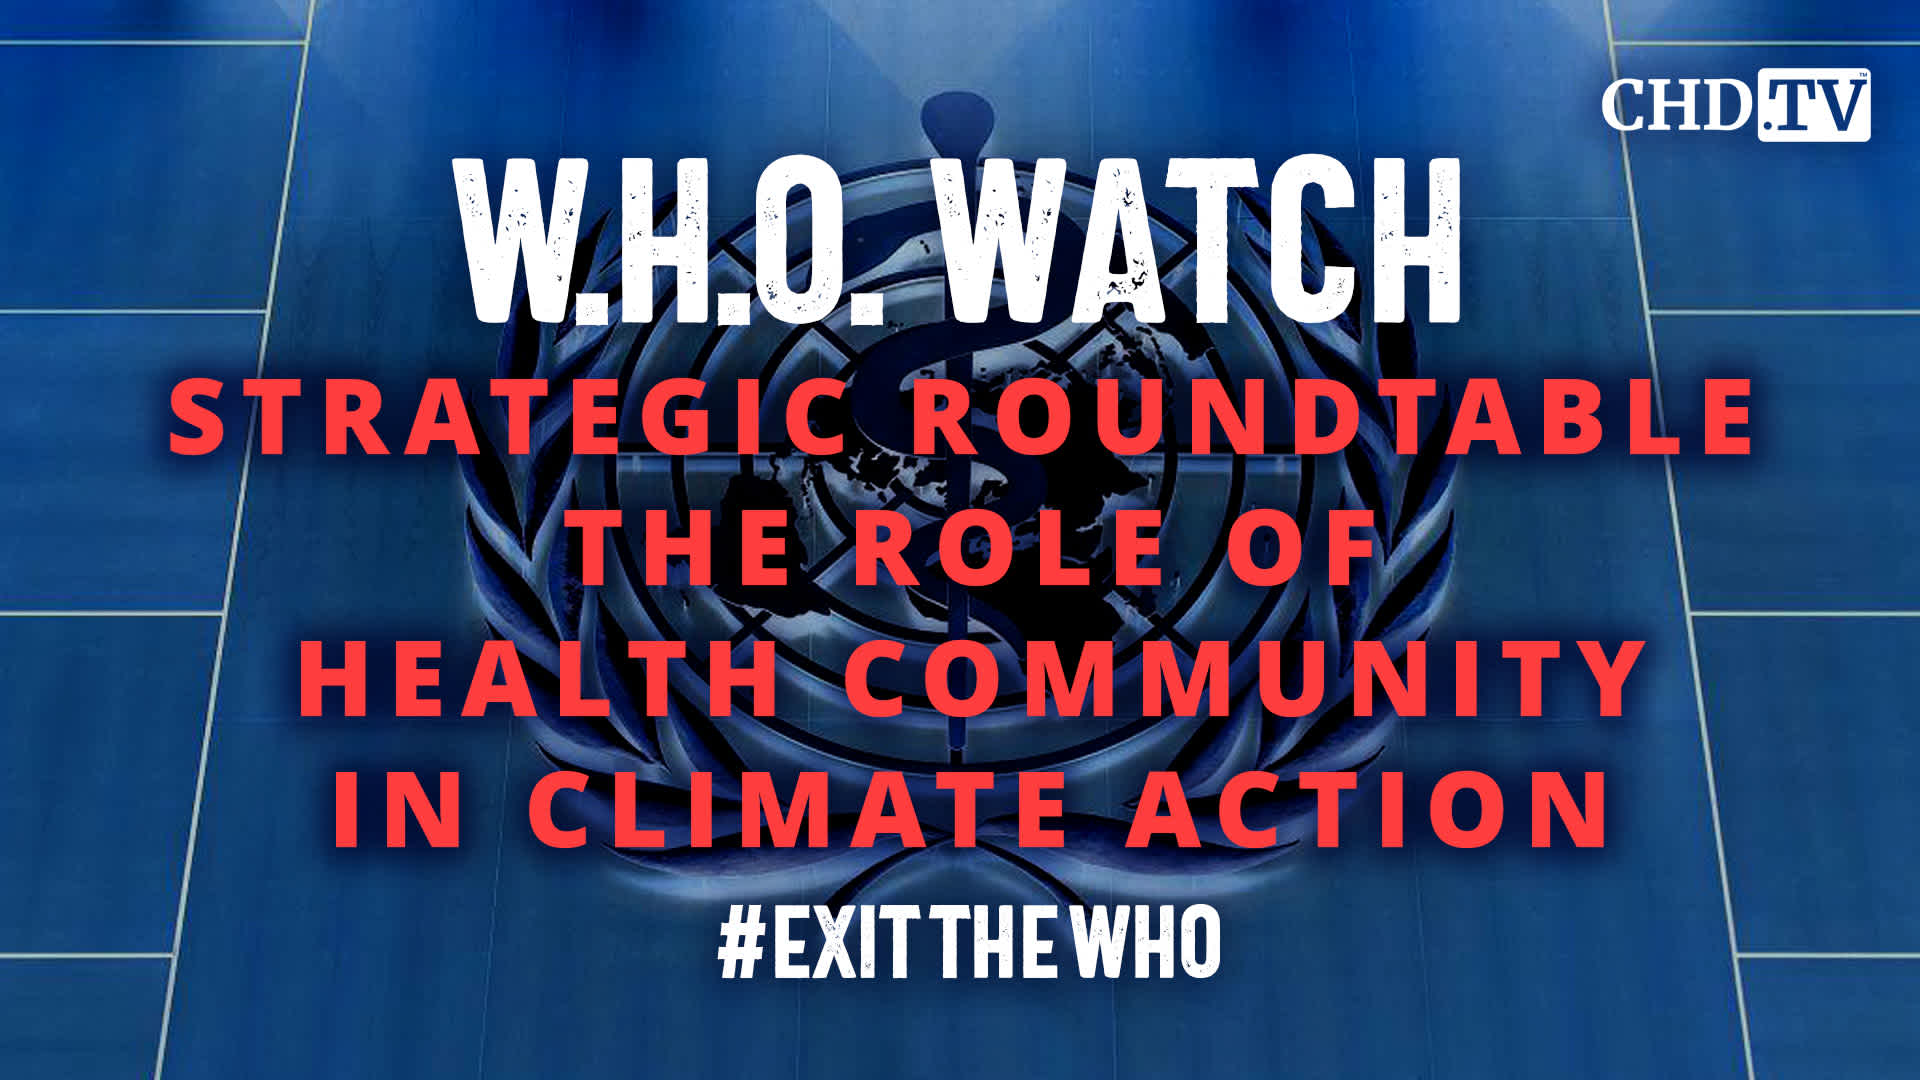 Strategic roundtable: The role of health community in #ClimateAction